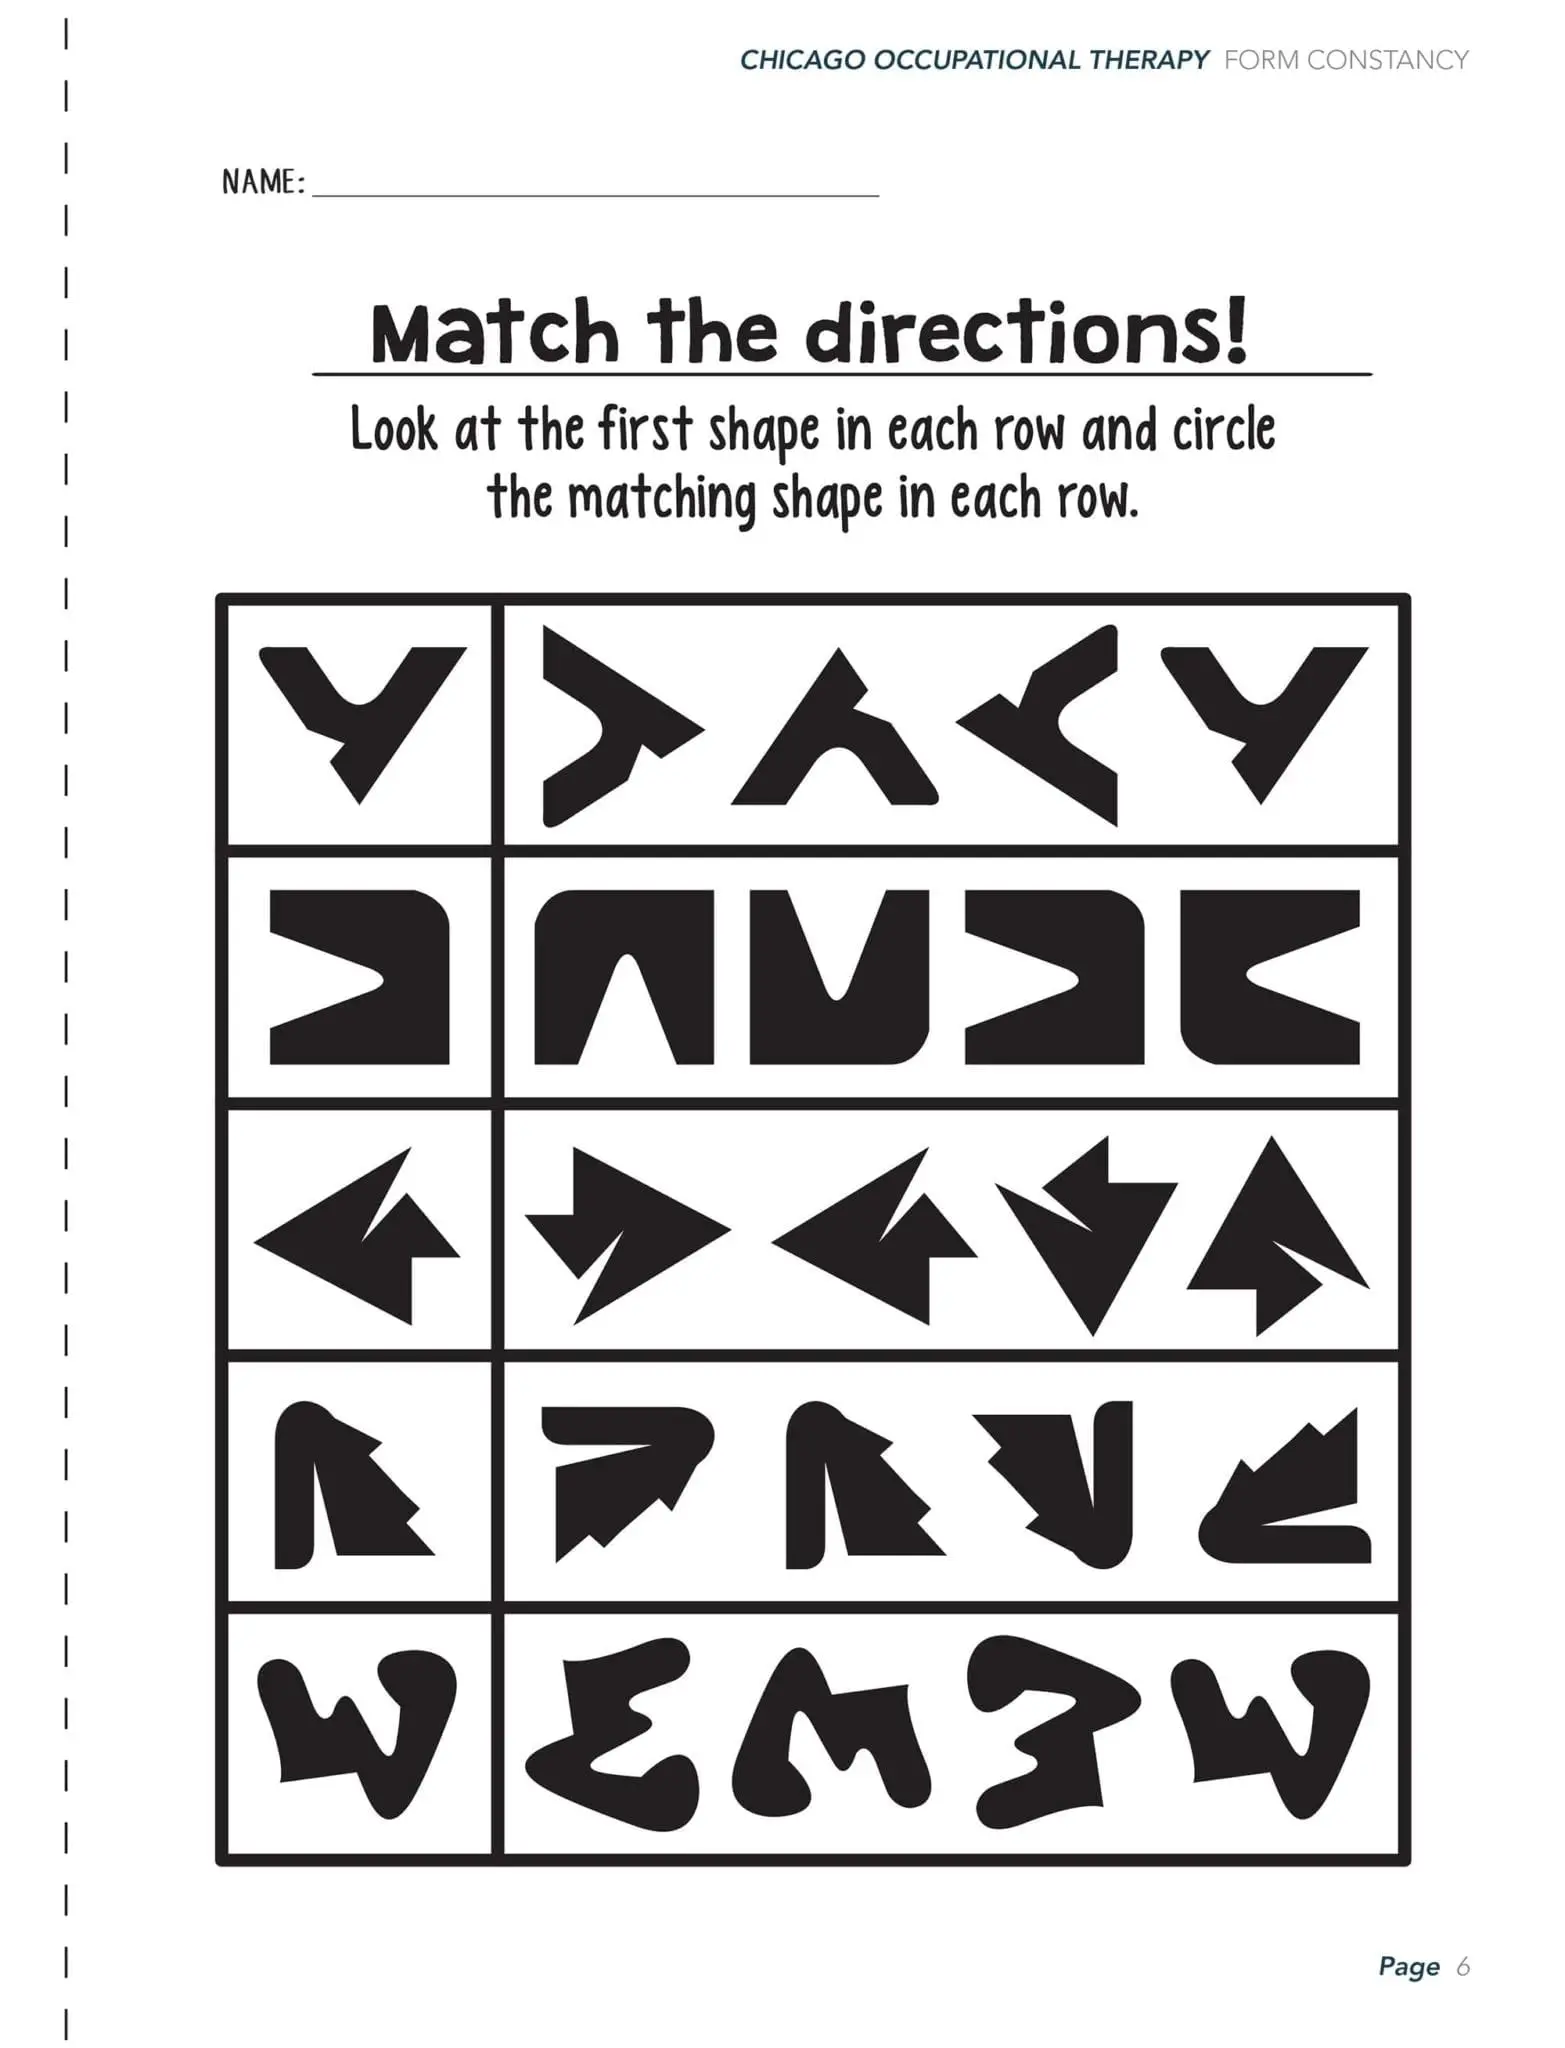 visual-perceptual-activity-worksheets-chicago-occupational-therapy-30